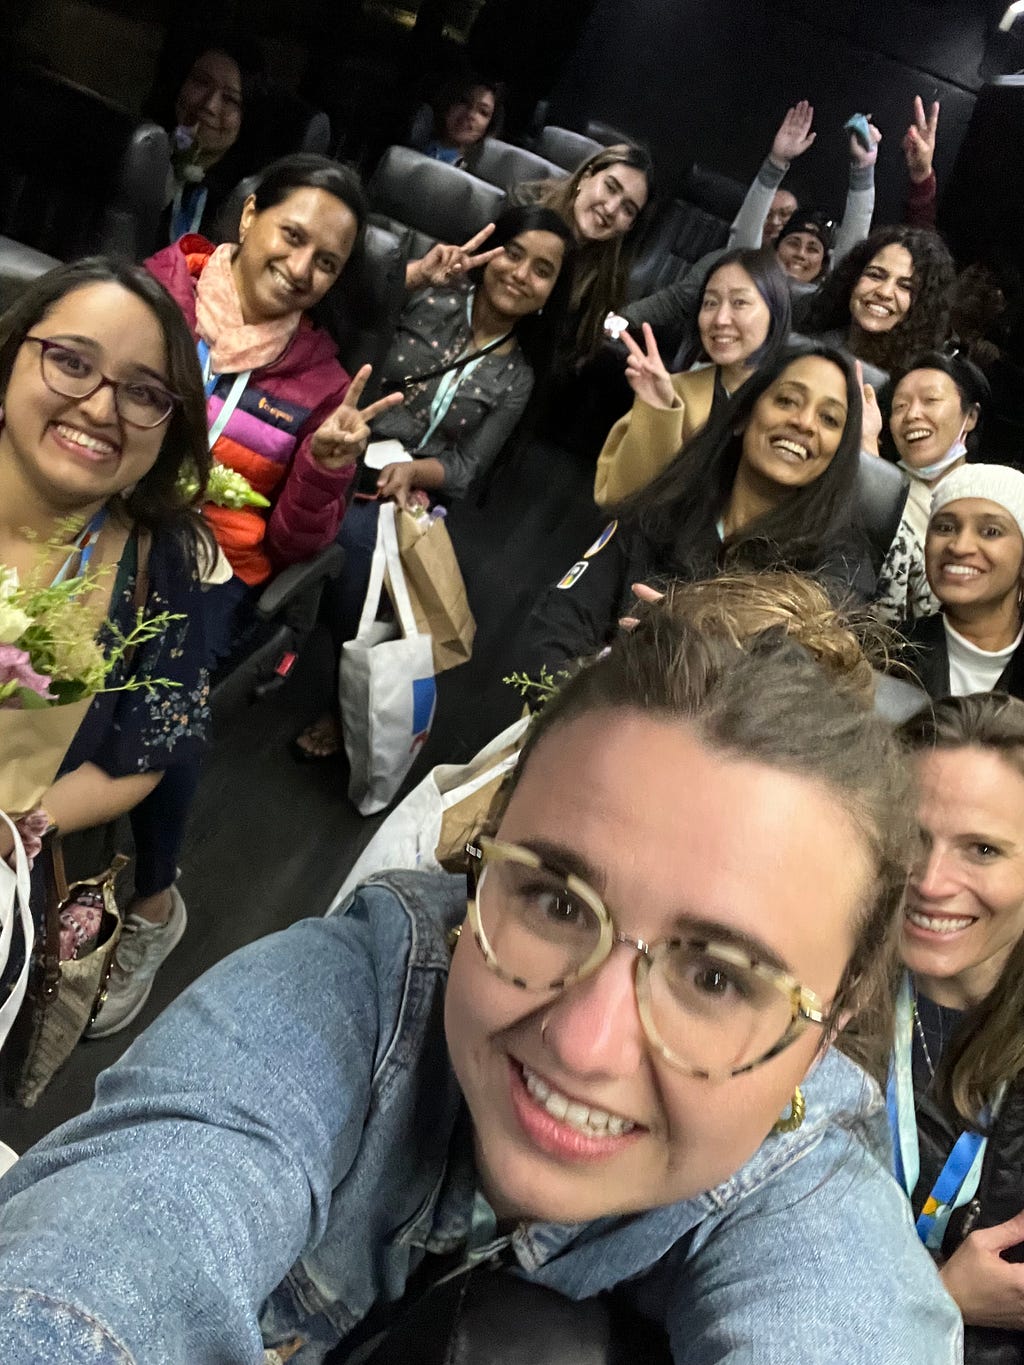 A group selfie of some of the Women Techmaker members in the bus